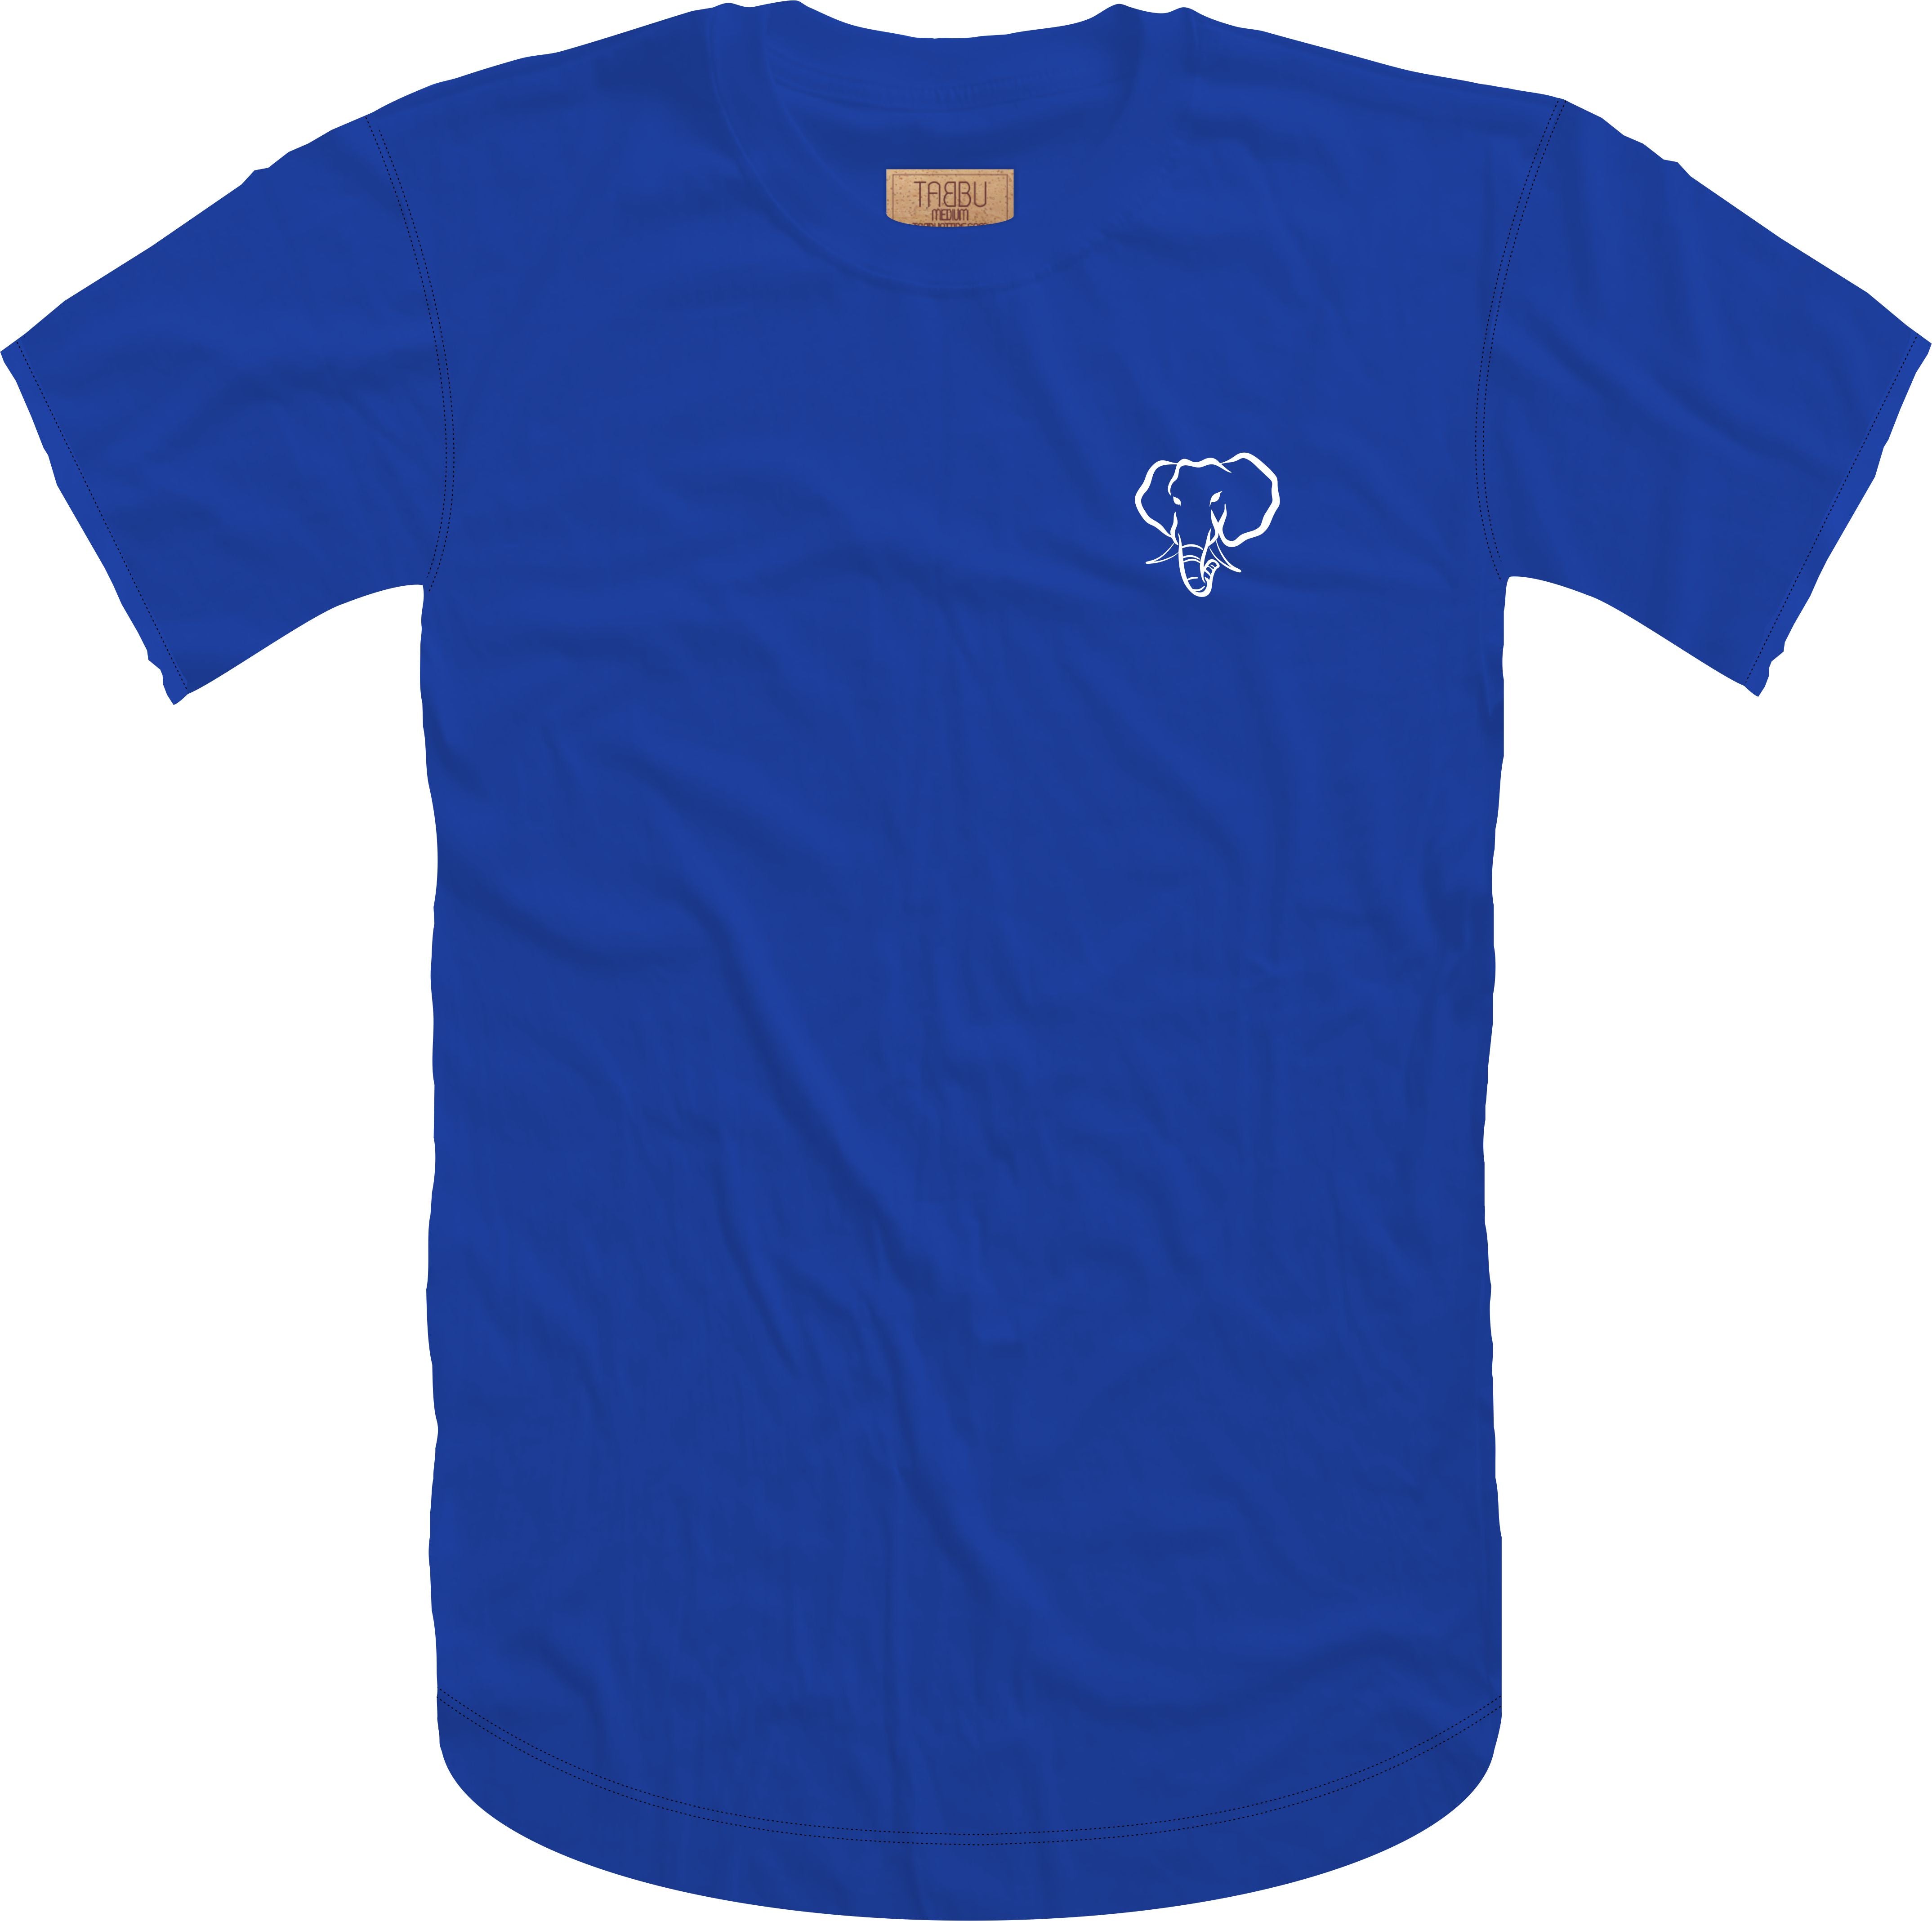 Elephant Head Crewneck Tee in Royal with White Embroidery